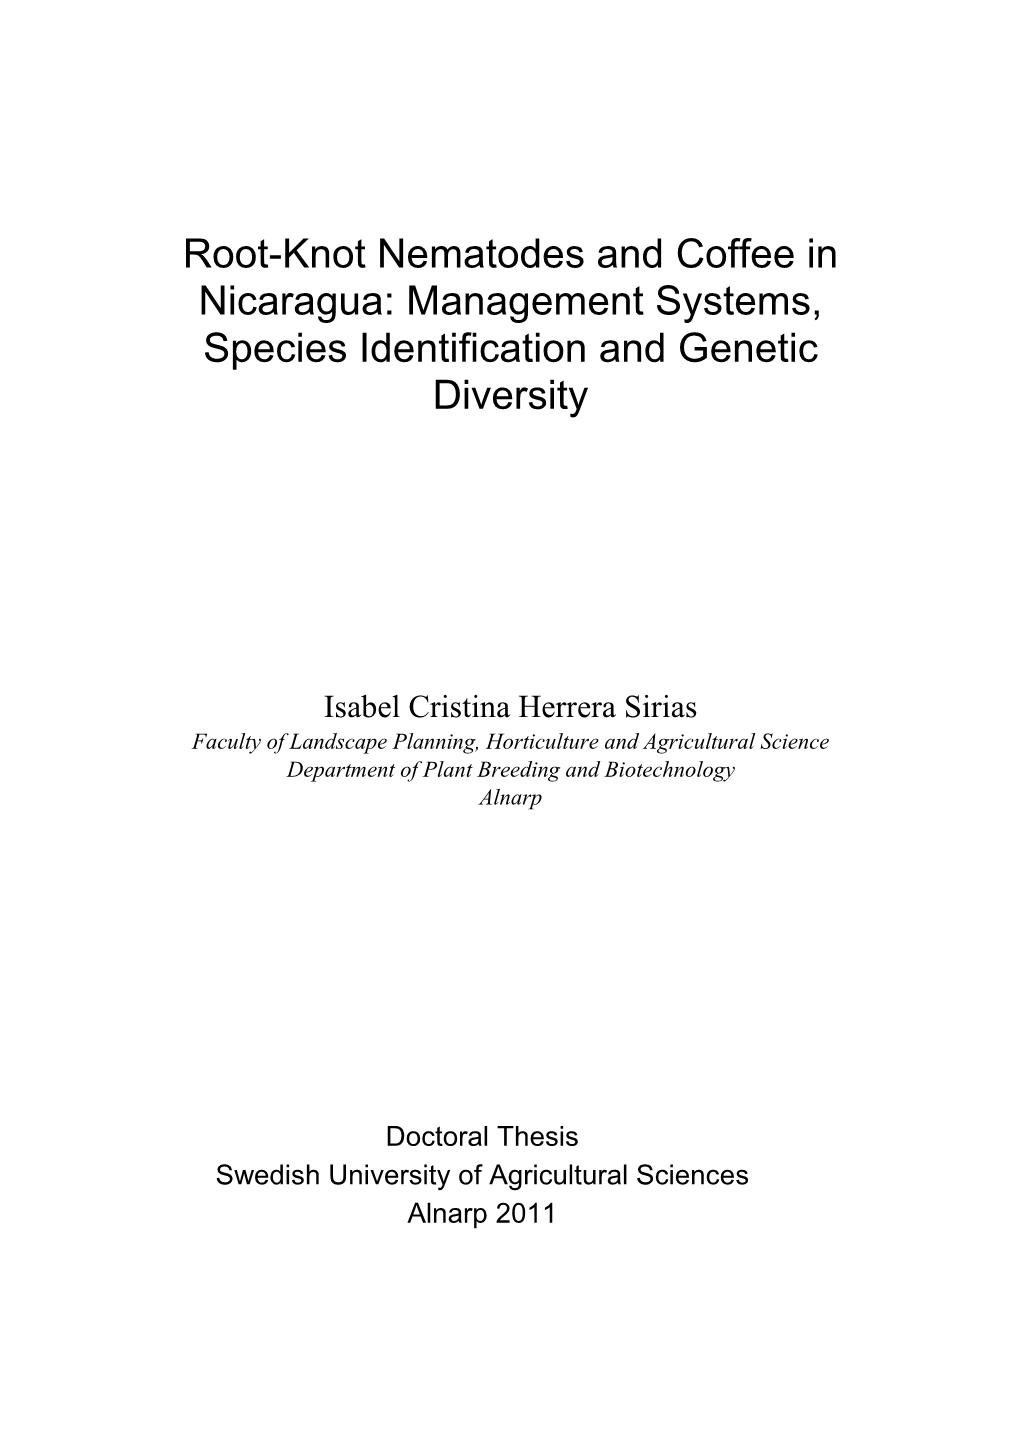 Root-Knot Nematodes and Coffee in Nicaragua: Management Systems, Species Identification and Genetic Diversity